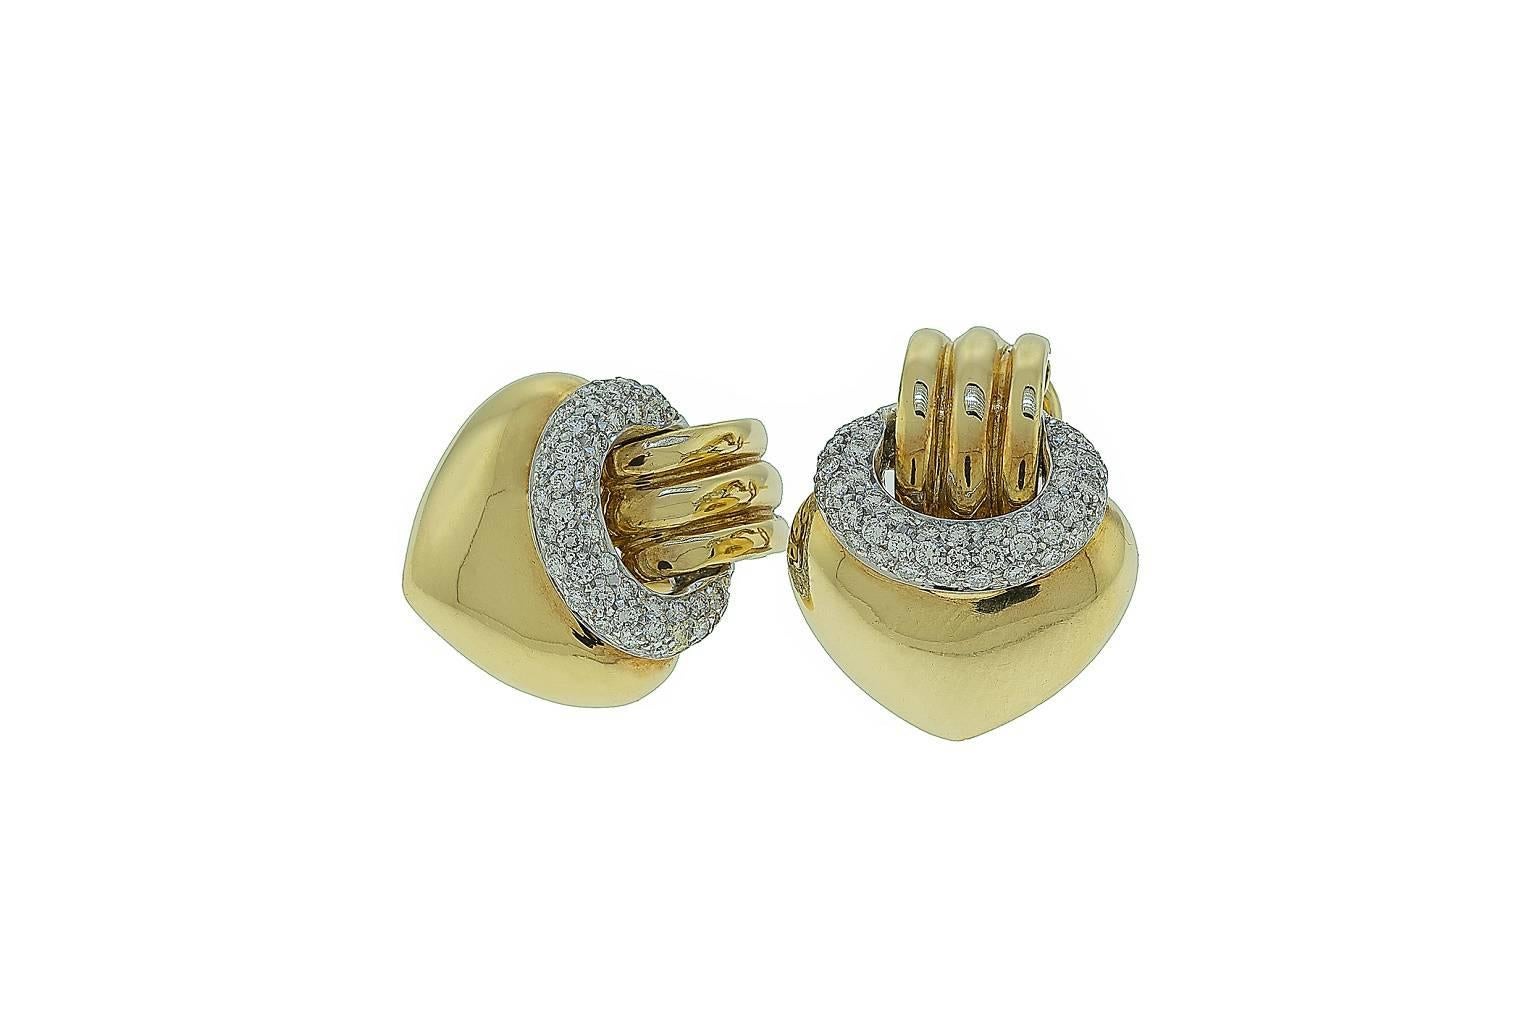 These earrings are an interesting variation of the traditional door knocker earring. Just the right size and the right amount of diamonds to make a statement, they can be worn casual or dressed up. The earrings are 18K yellow gold. The diamonds are